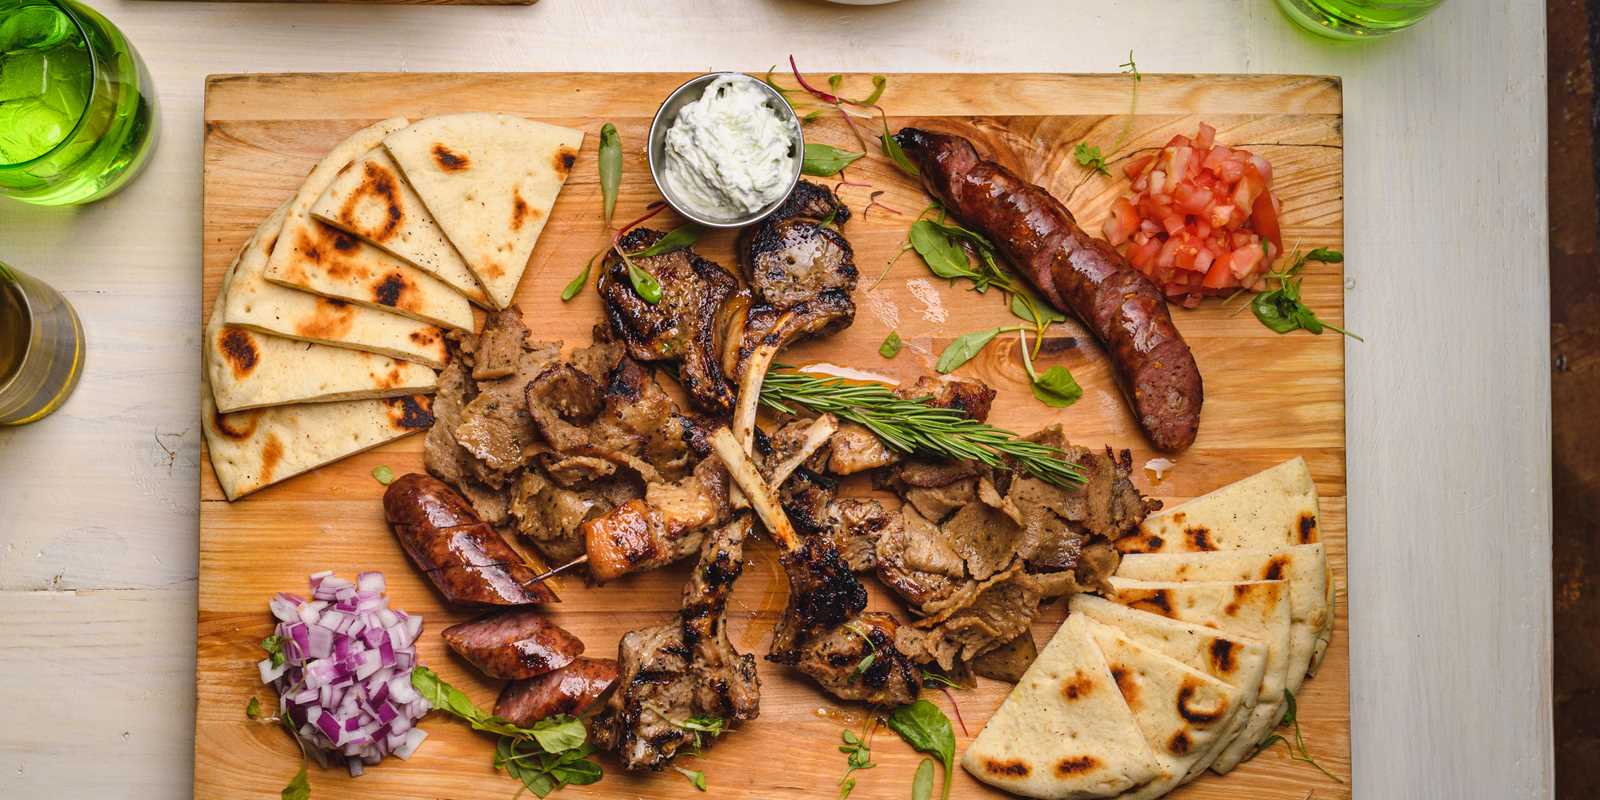 The Mediterranean Grille: Lollipop lamb chops, chicken skewers, gyro carvings and loukaniko (traditional village sausage).